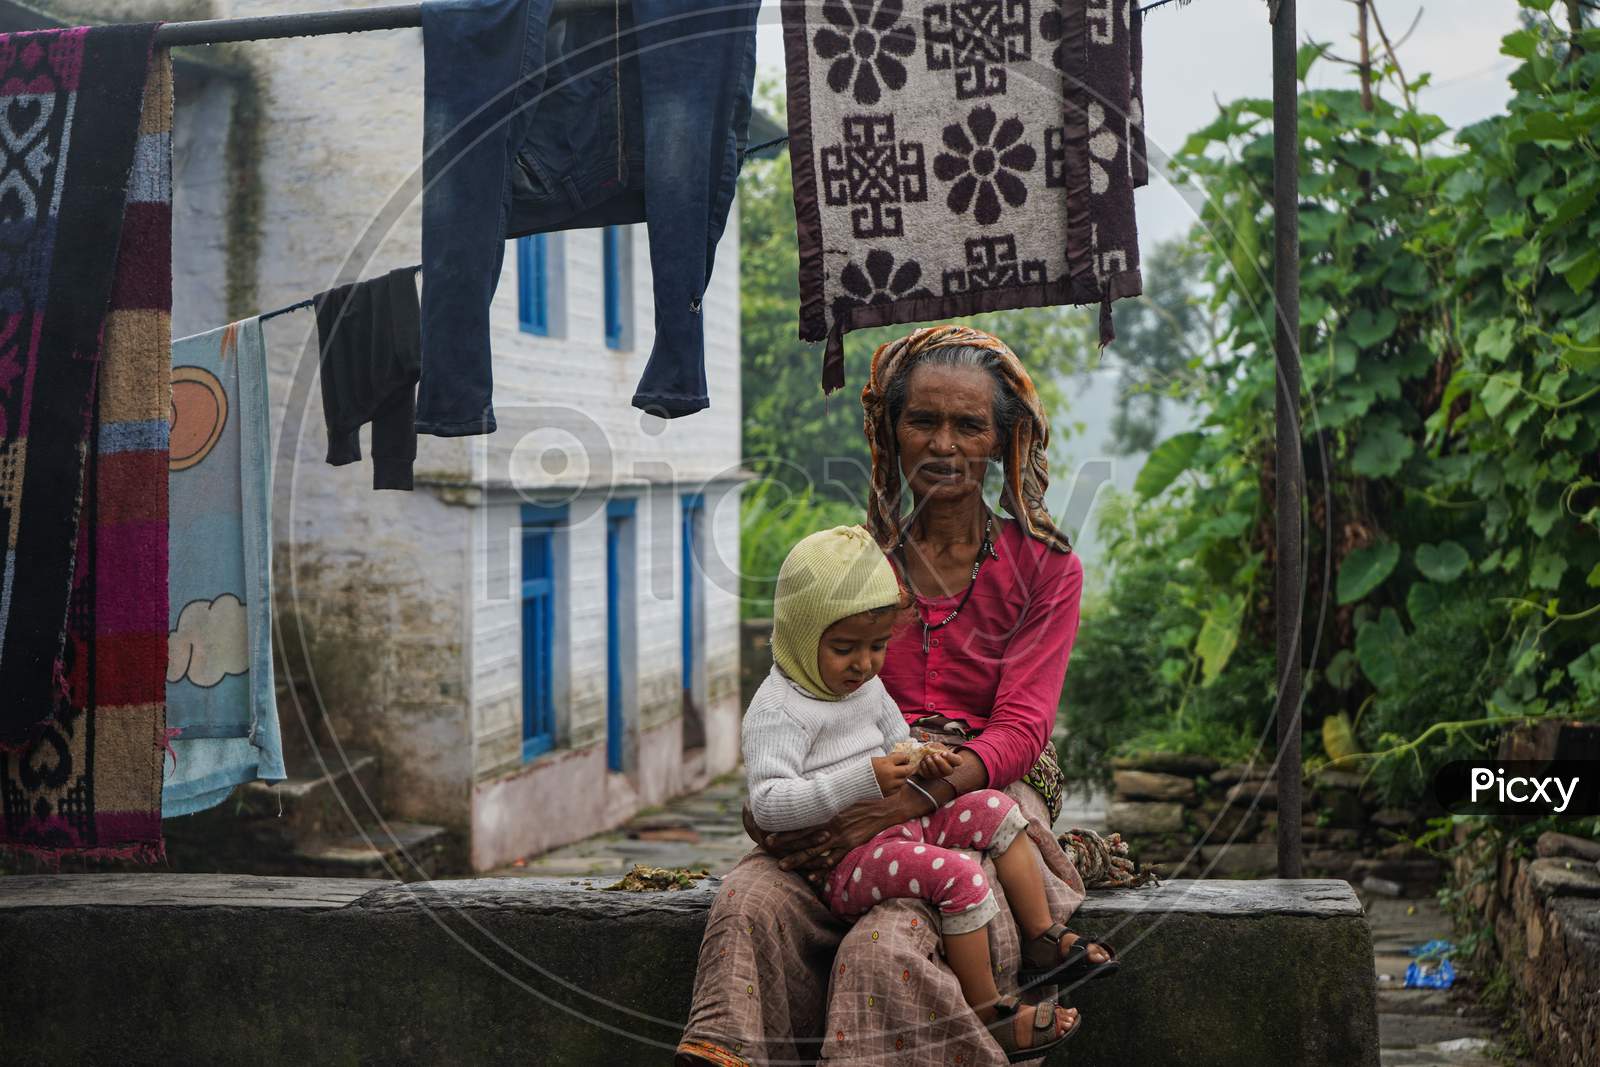 Almora, India - September 06, 2020: Portrait Of An Old Woman, Wearing Old Rugged Saree Holding A Kid In Her Lap.